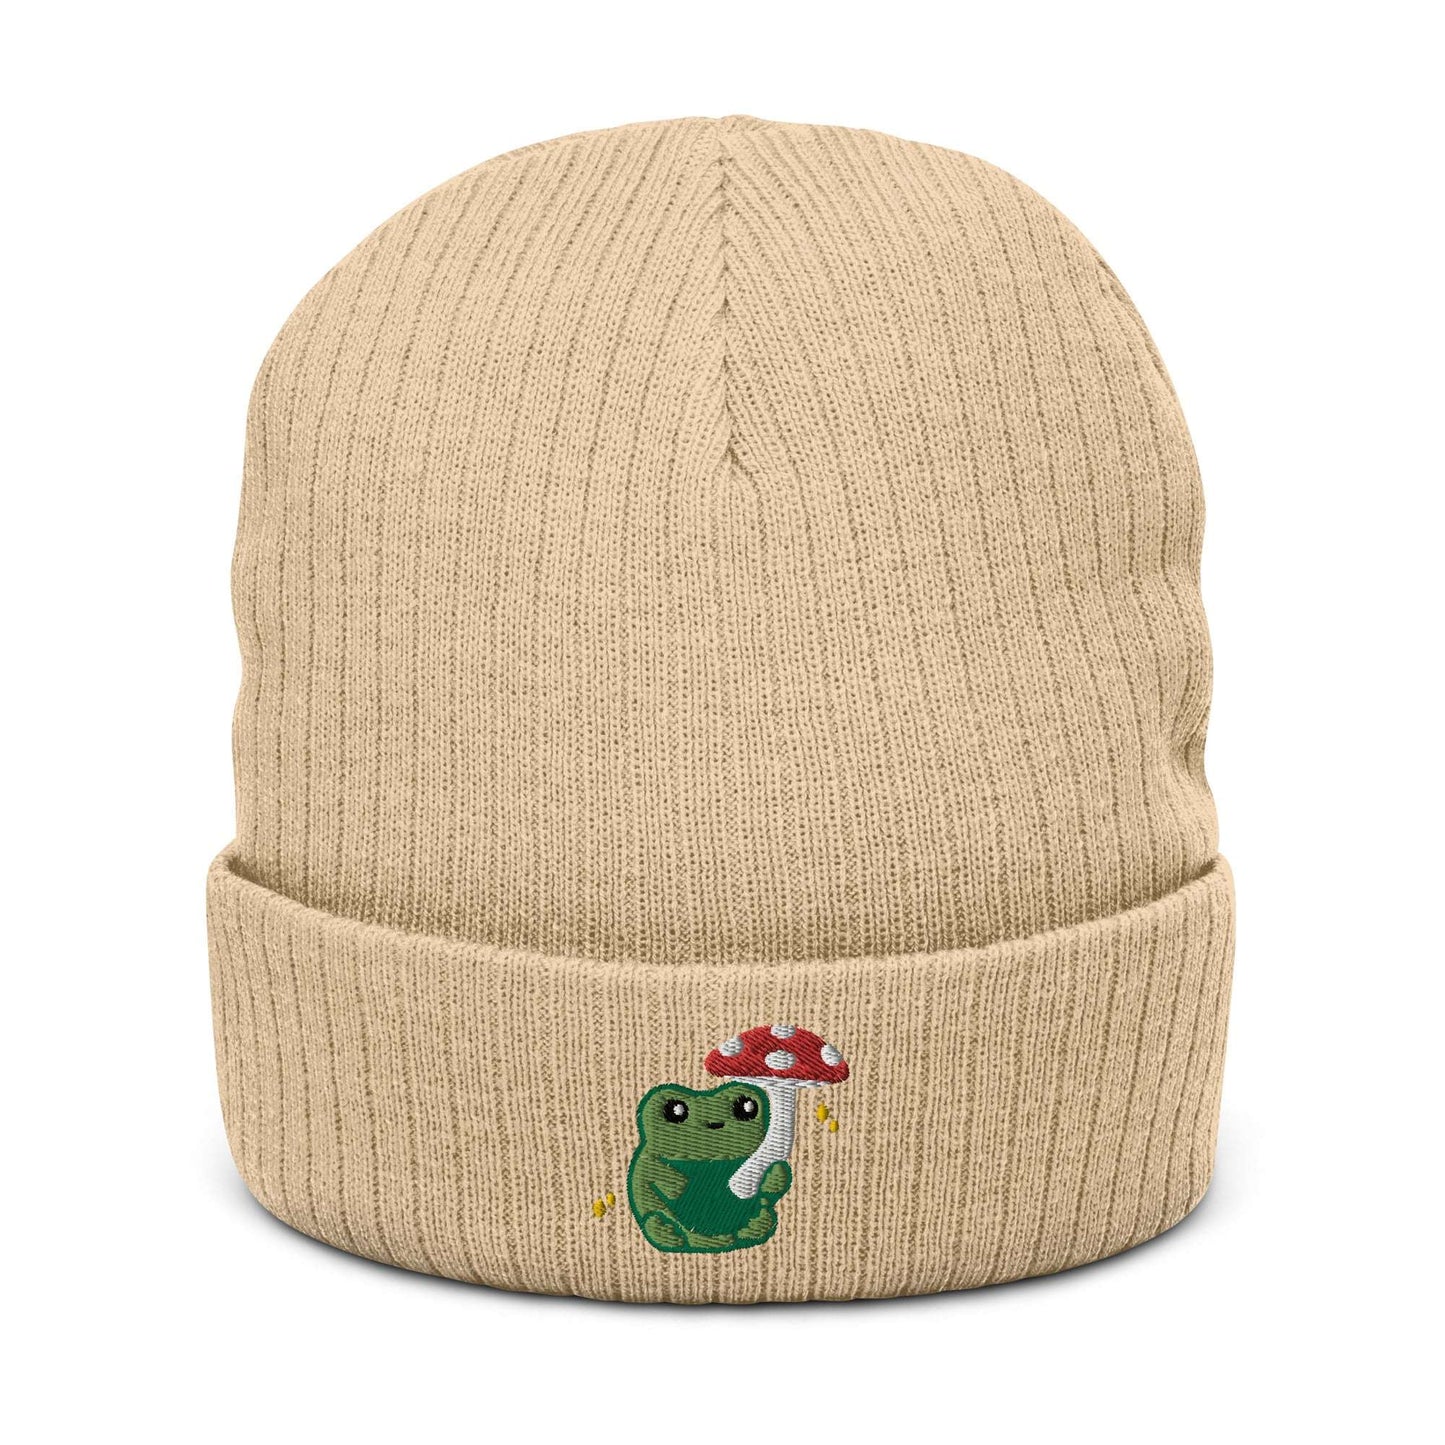 Ribbed Knit Beanie with Cute Embroidered Frog holding a Mushroom Umbrella by Wild Whimsy Woolies